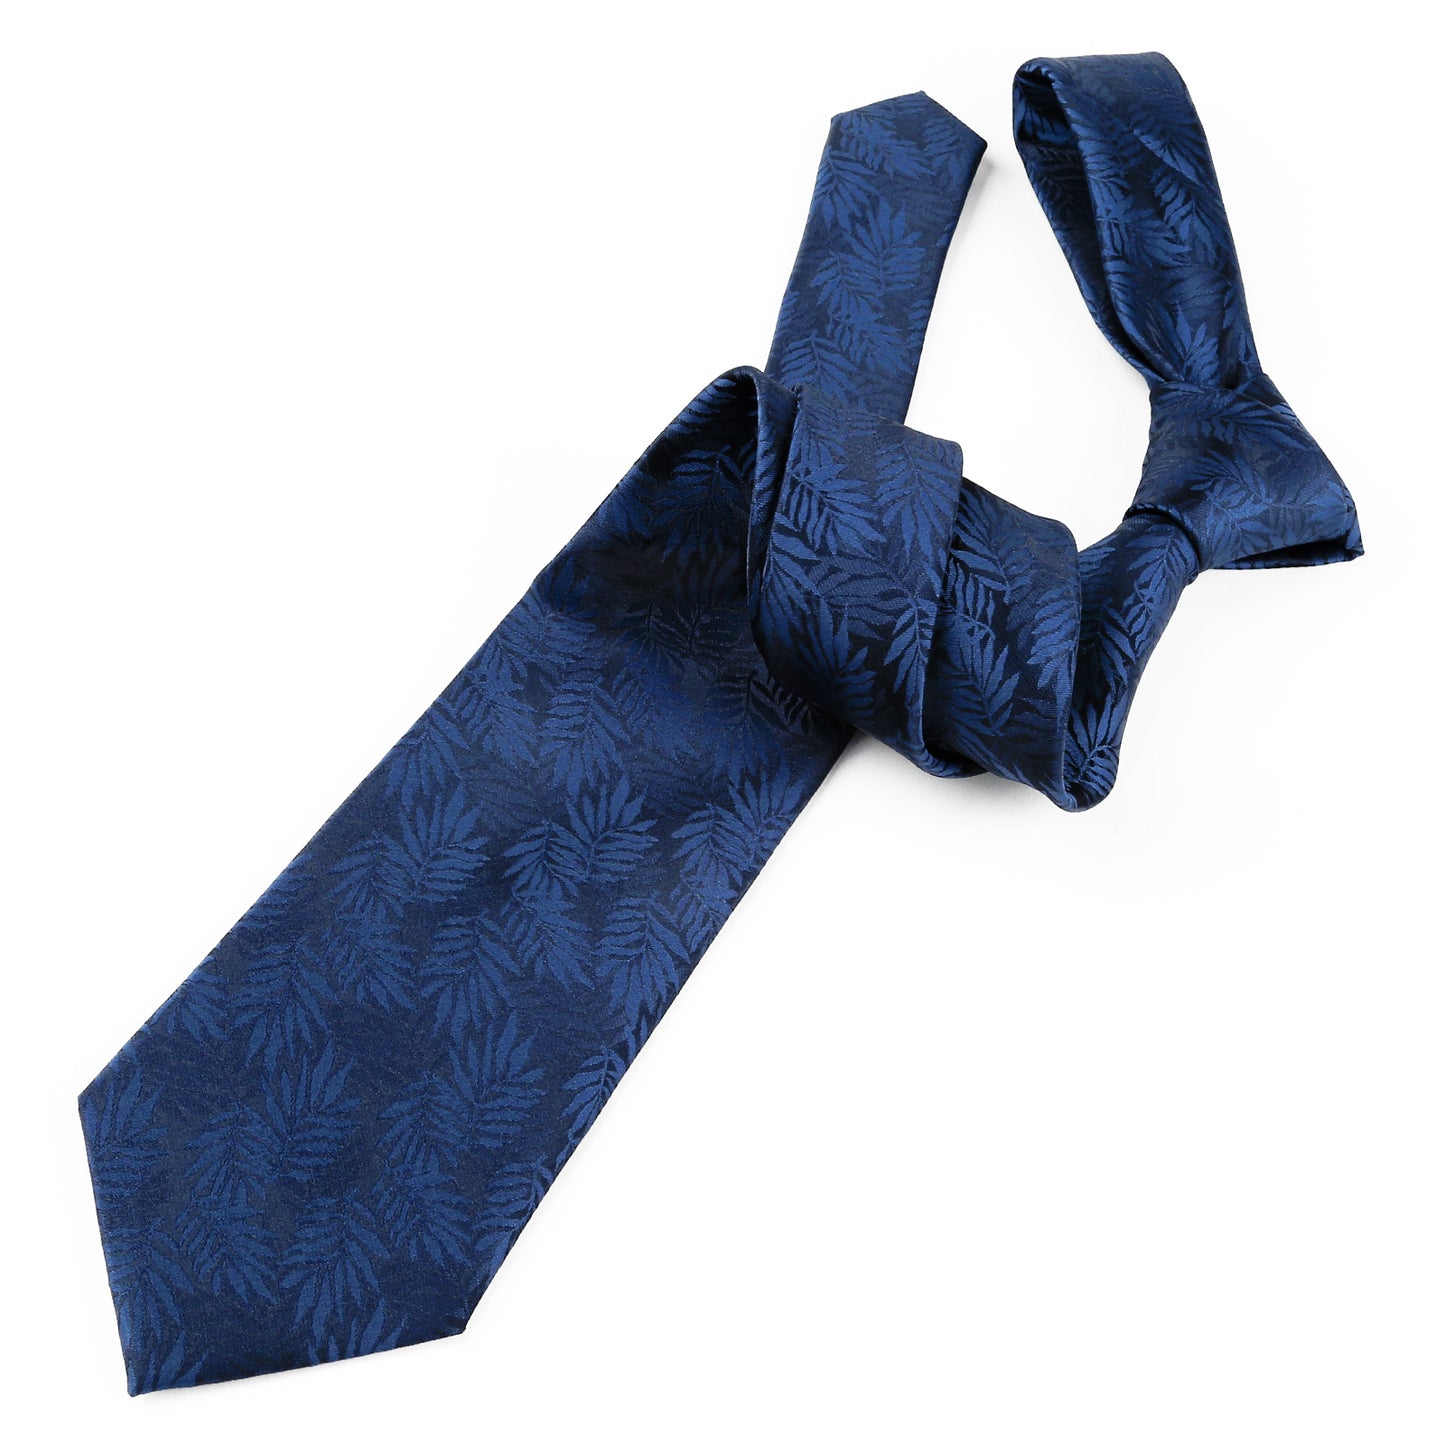 Men‘s Floral Pattern Tie with Pocket Square 3.15inches Self-tied Set, #141